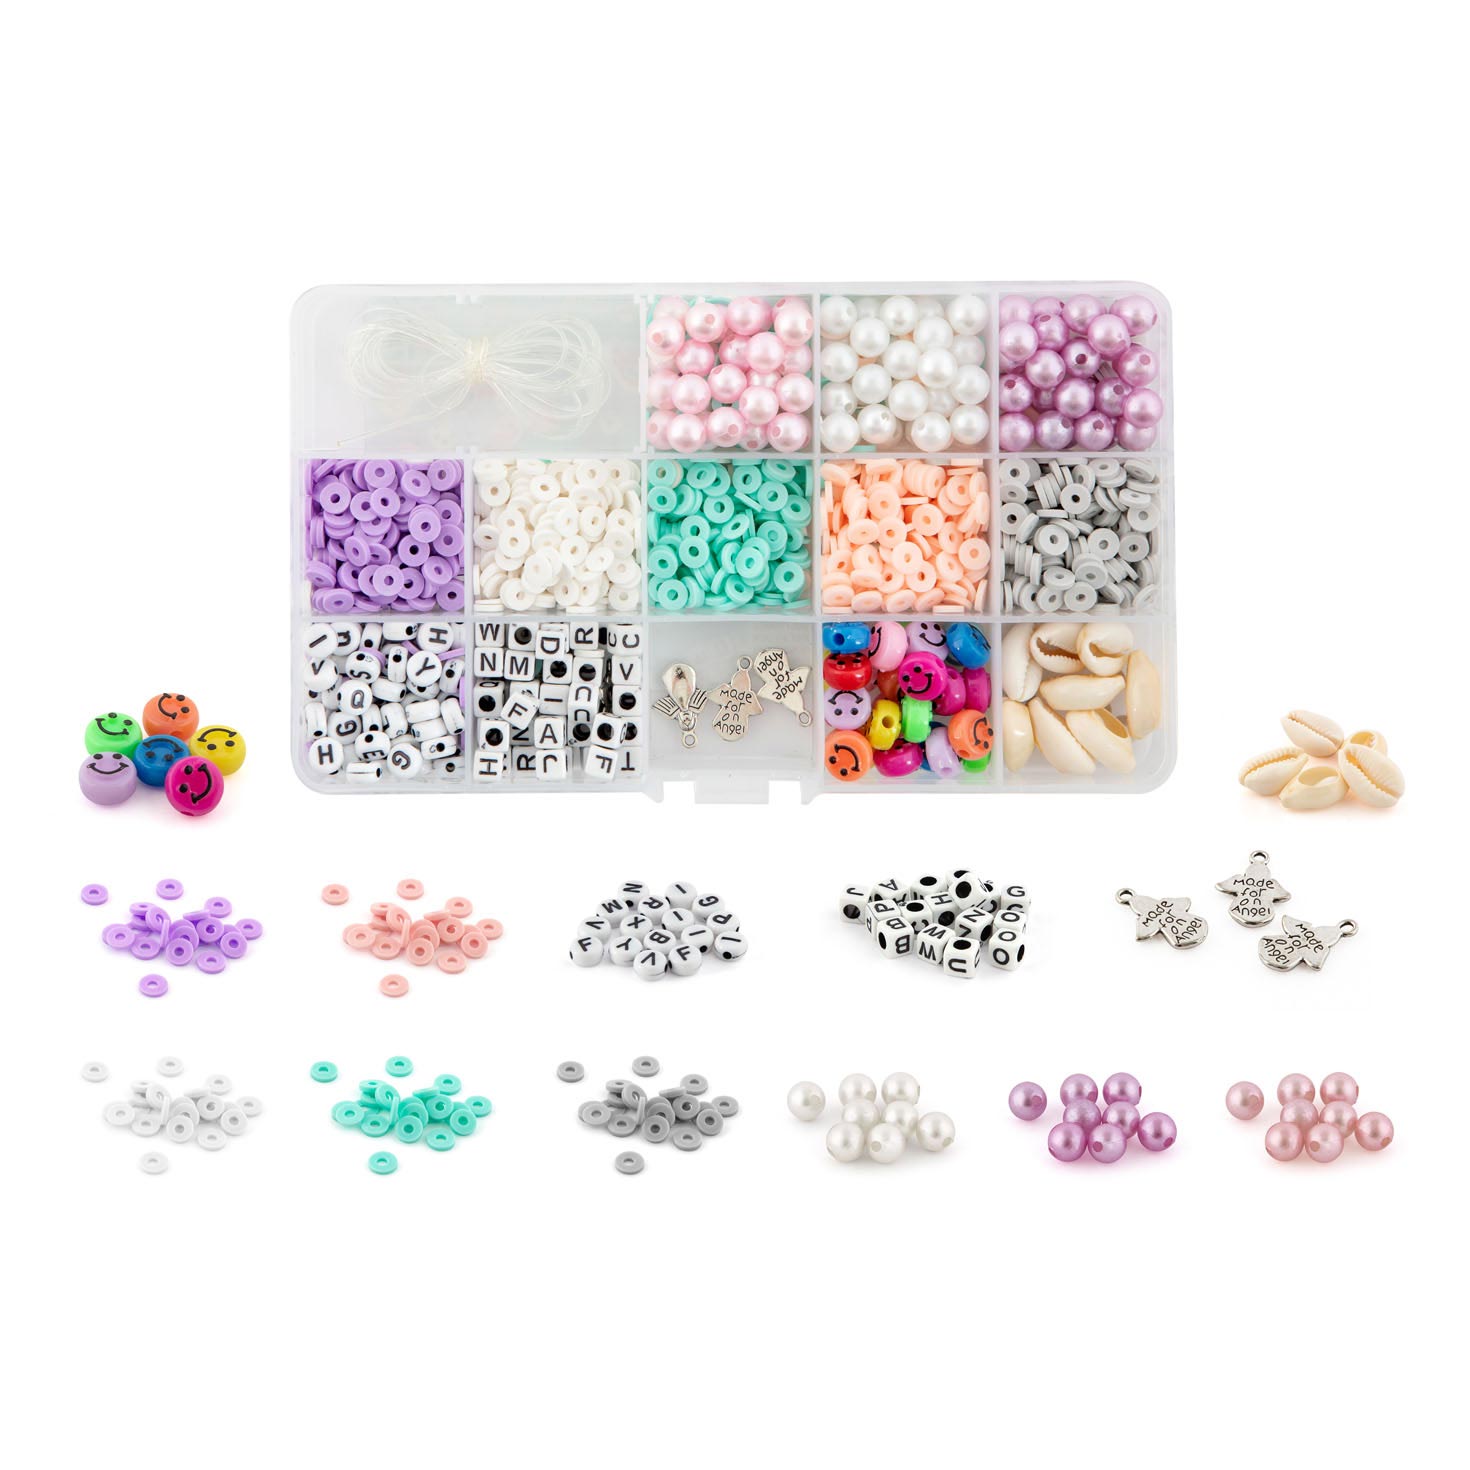 Bead sets Beads in Box, 12 sets of beads